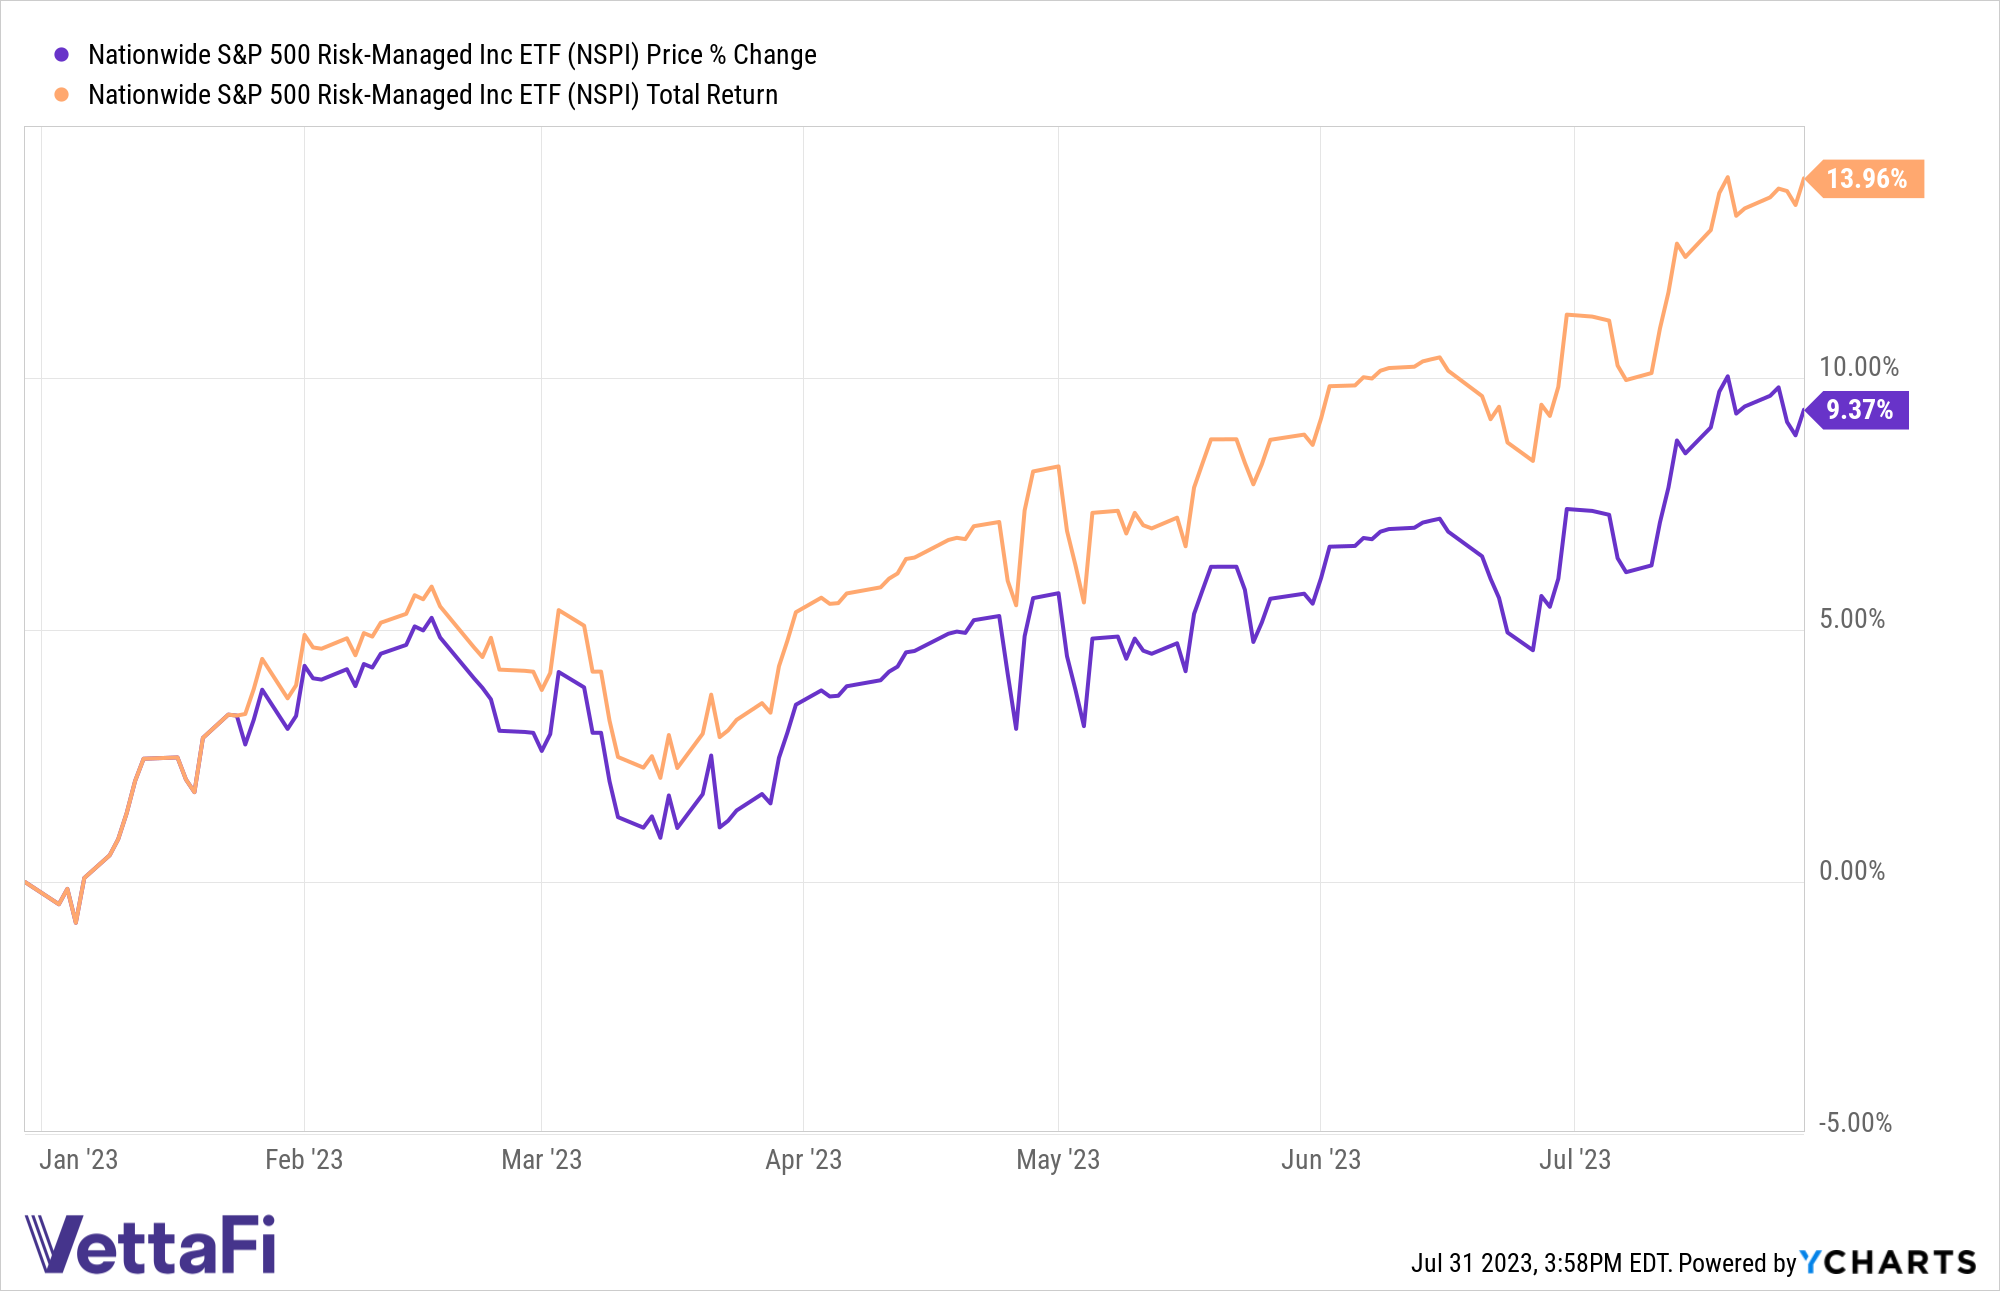 Chart of NSPI's performance YTD. Price returns are 9.37% and total returns are 13.96% as of July 28, 2023.